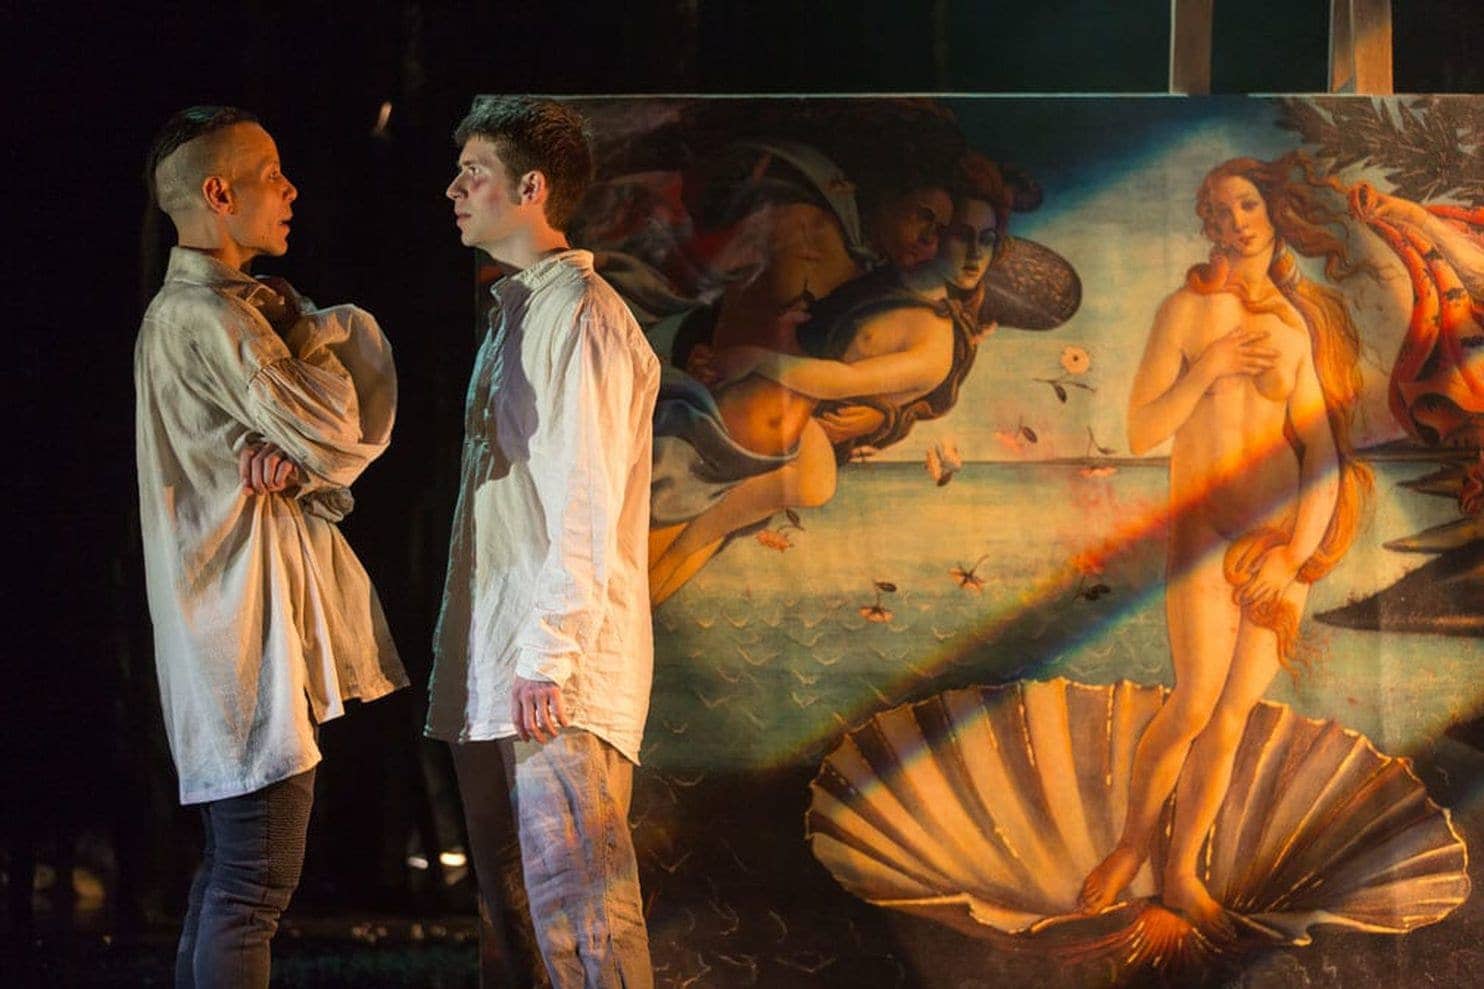 Jon Hudson Odom as Sandro and James Crichton as Leo in “Botticelli in the Fire.” Photo by Scott Suchman.